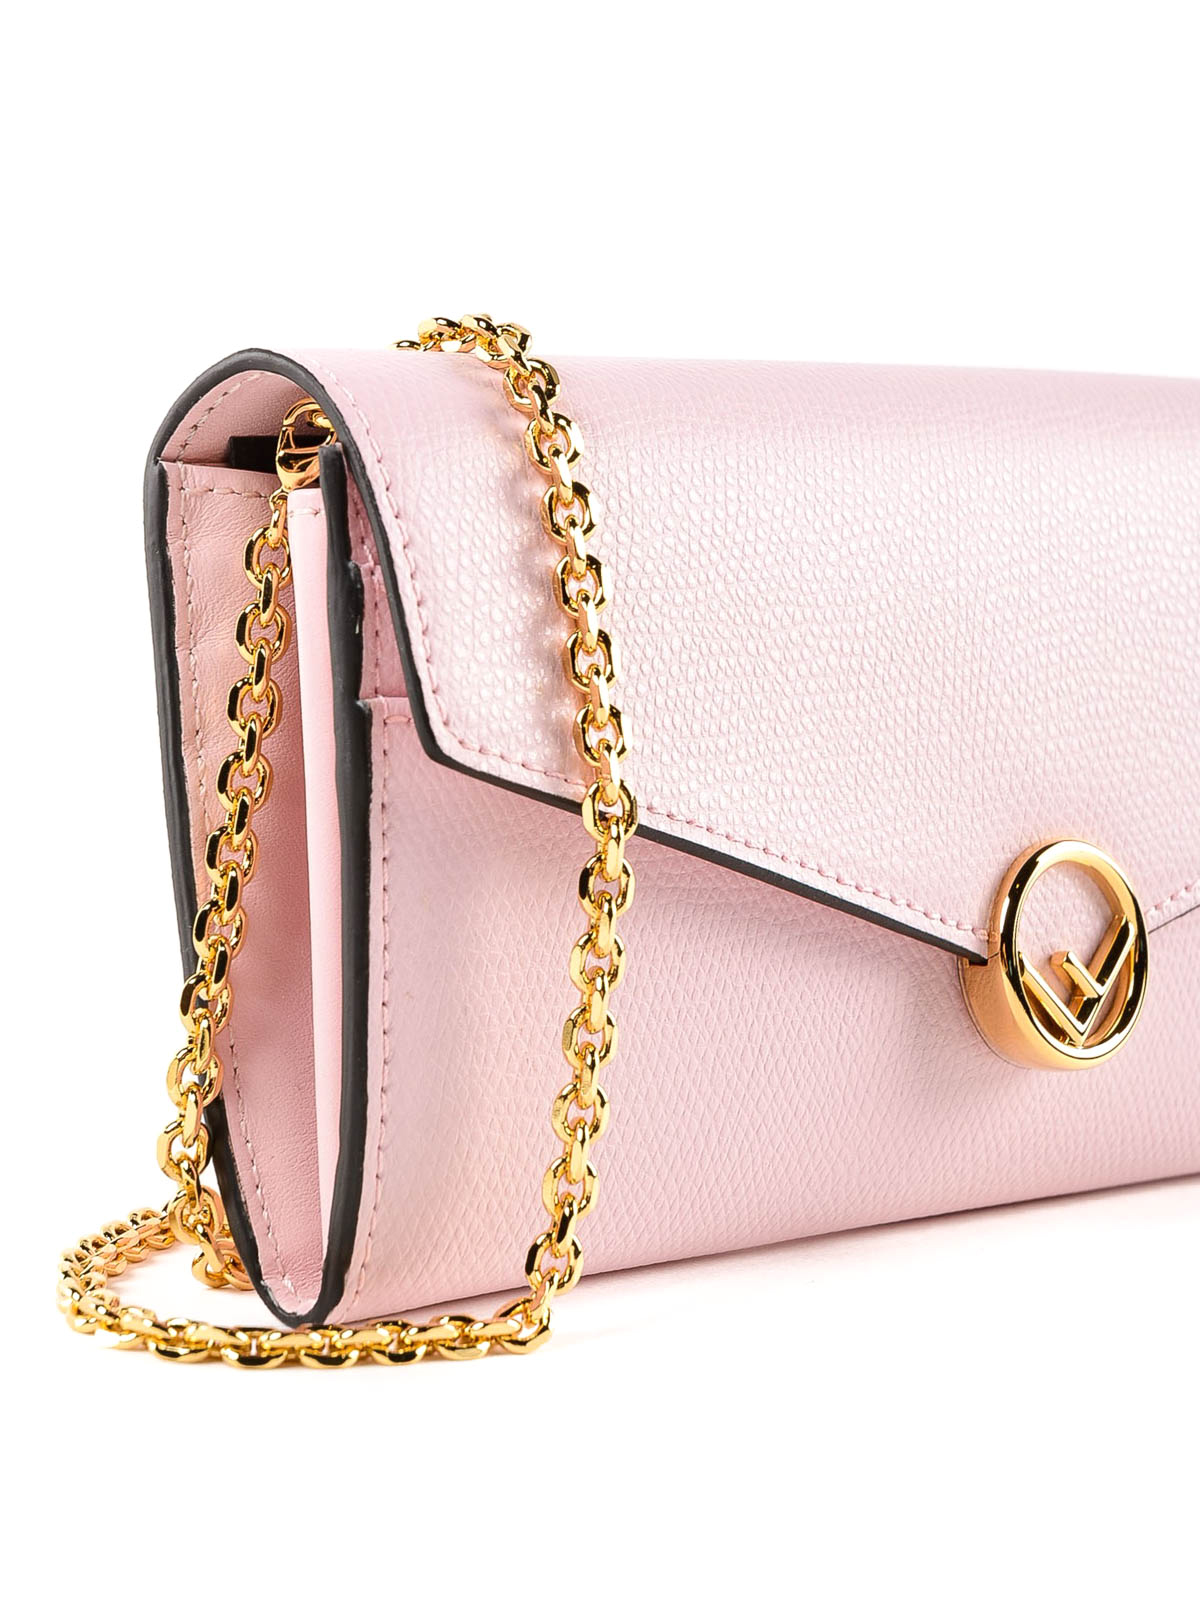 Wallets & purses Fendi - Pink and gold leather wallet bag